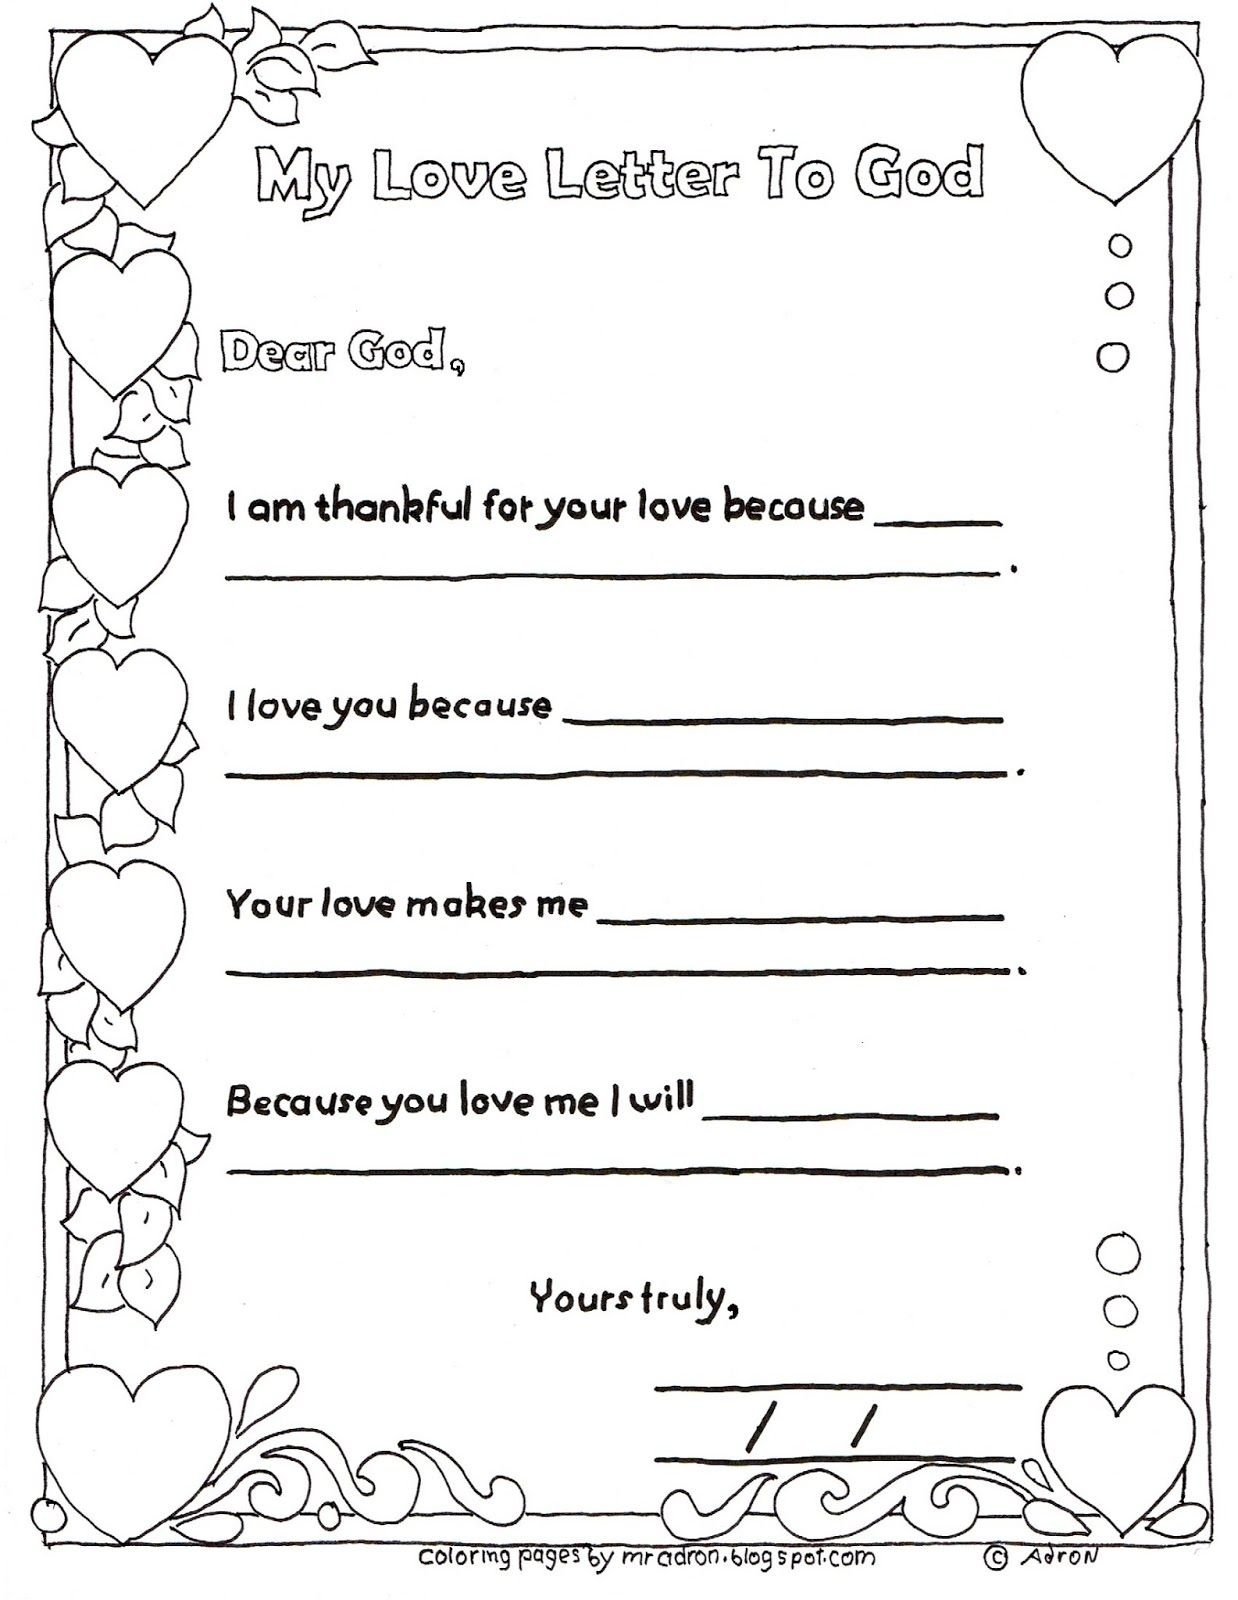 This Printable Coloring Page Is Perfect For A Church Lesson On Loving God I Created It For A St Letters To God Bible Lessons For Kids Sunday School Valentines